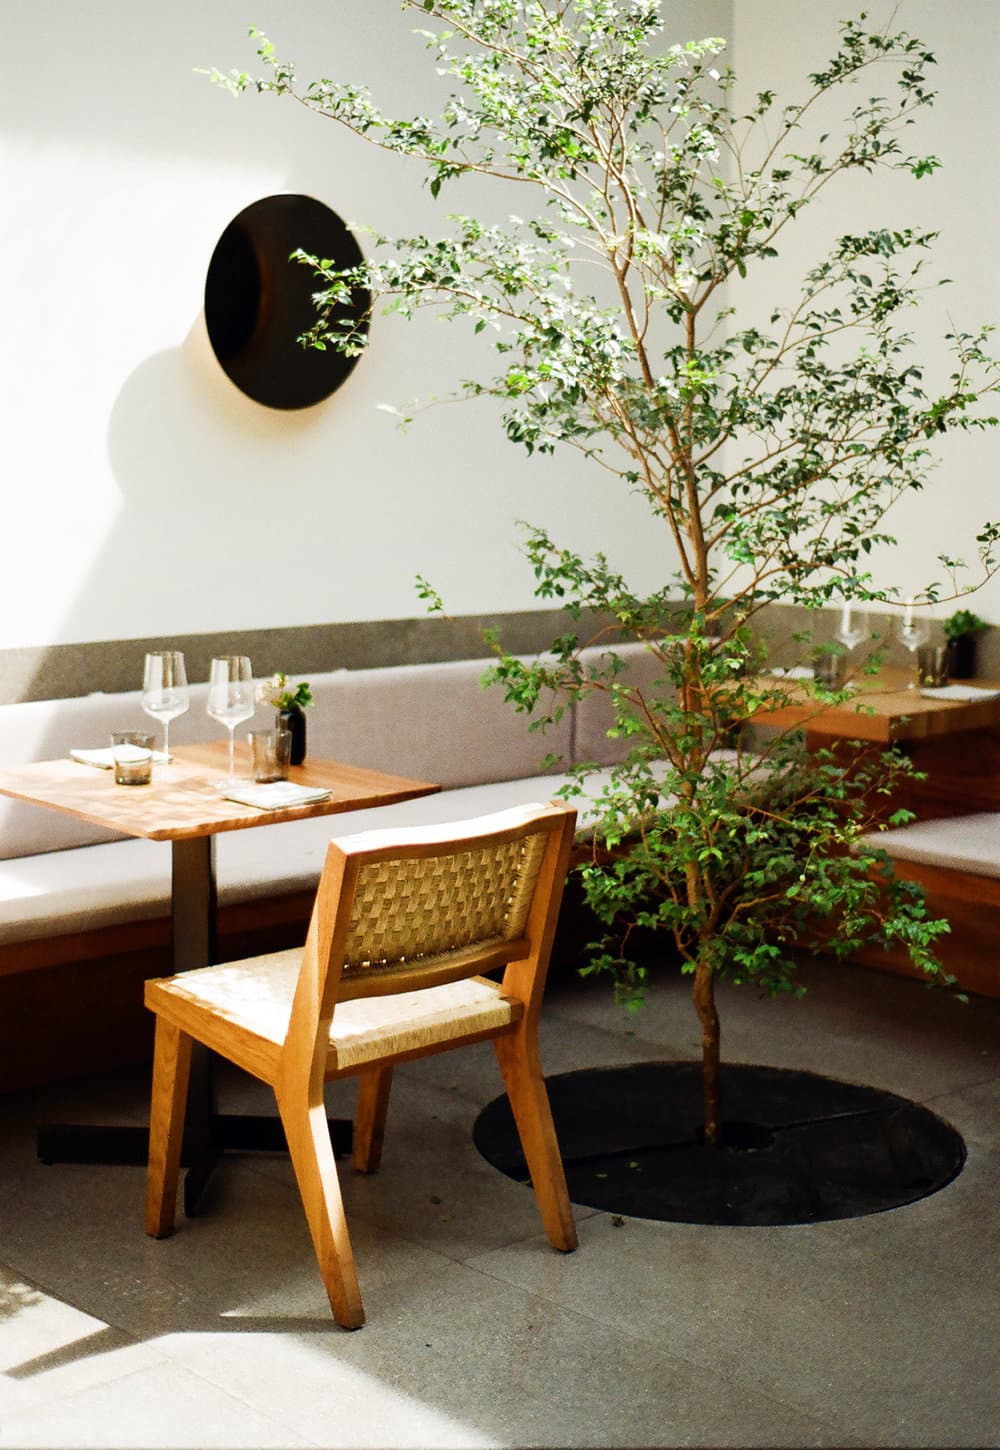 Pujol Restaurant in Mexico City photographed by Pia Riverola